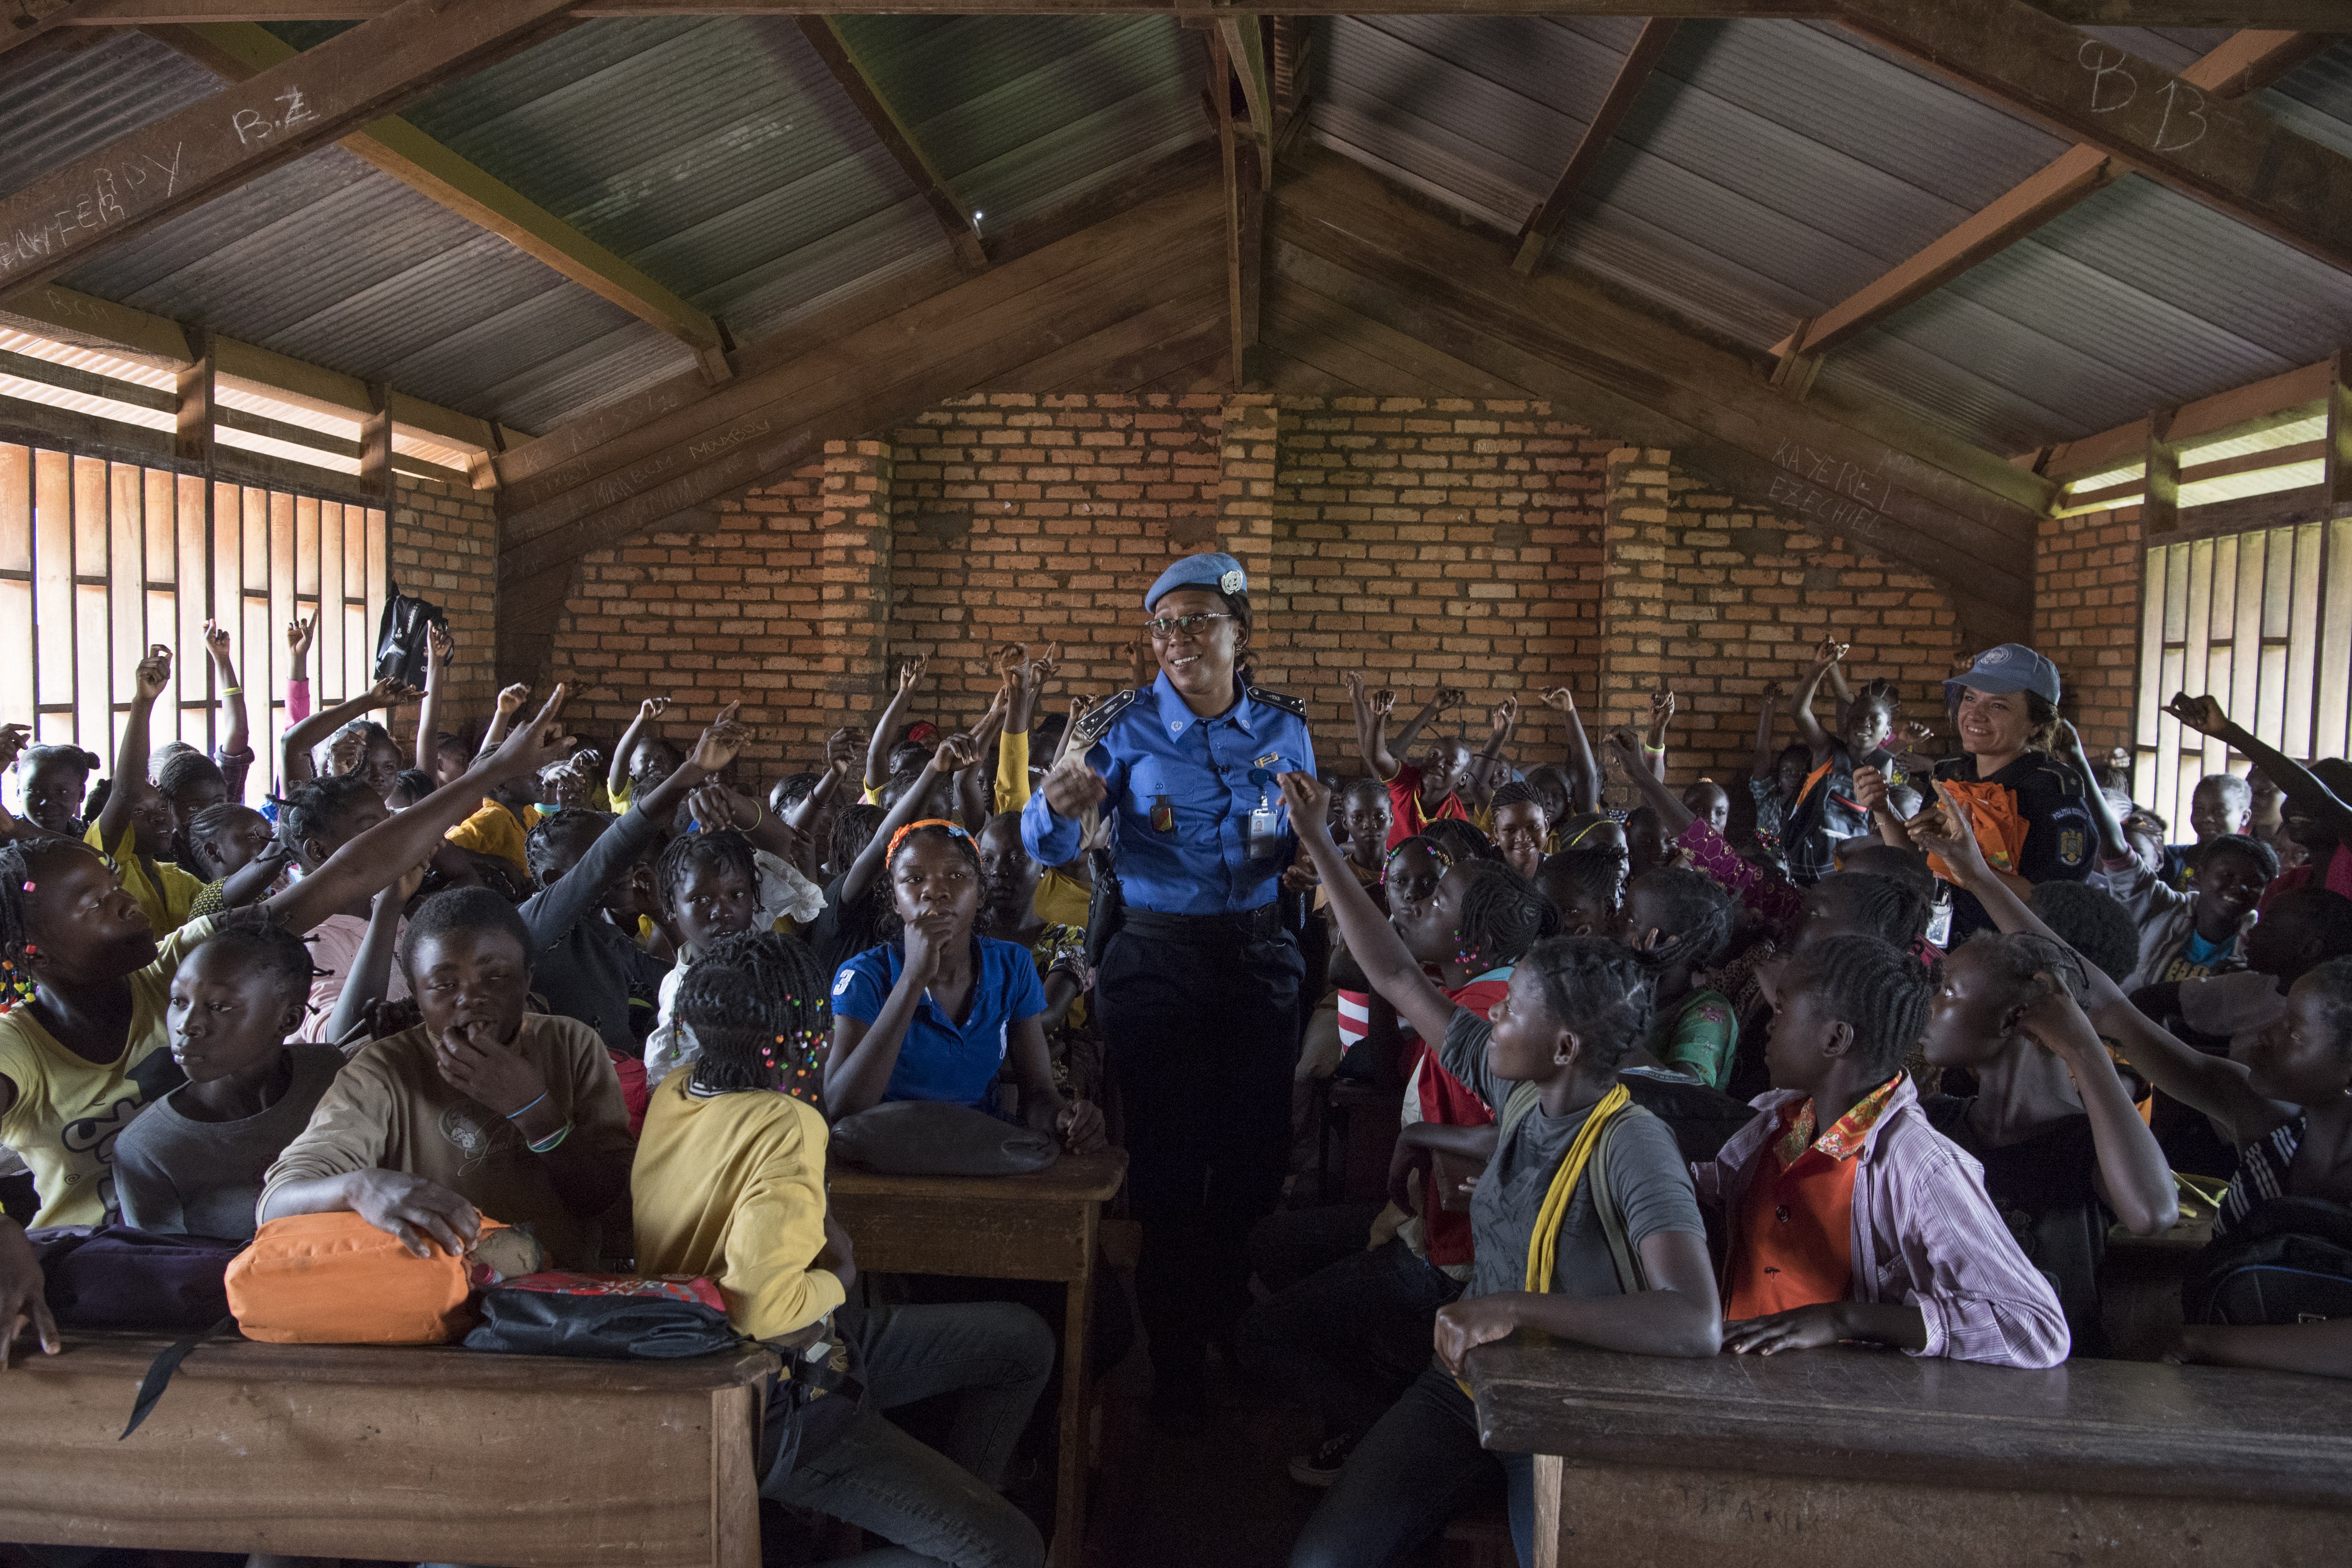 A UN Police Officer from Cameroon serving with the UN Multidimensional Integrated Stabilization Mission in the Central African Republic (MINUSCA), conducts a session on gender-based violence at a school in Bangui. UN Photo/Eskinder Debebe (2017)